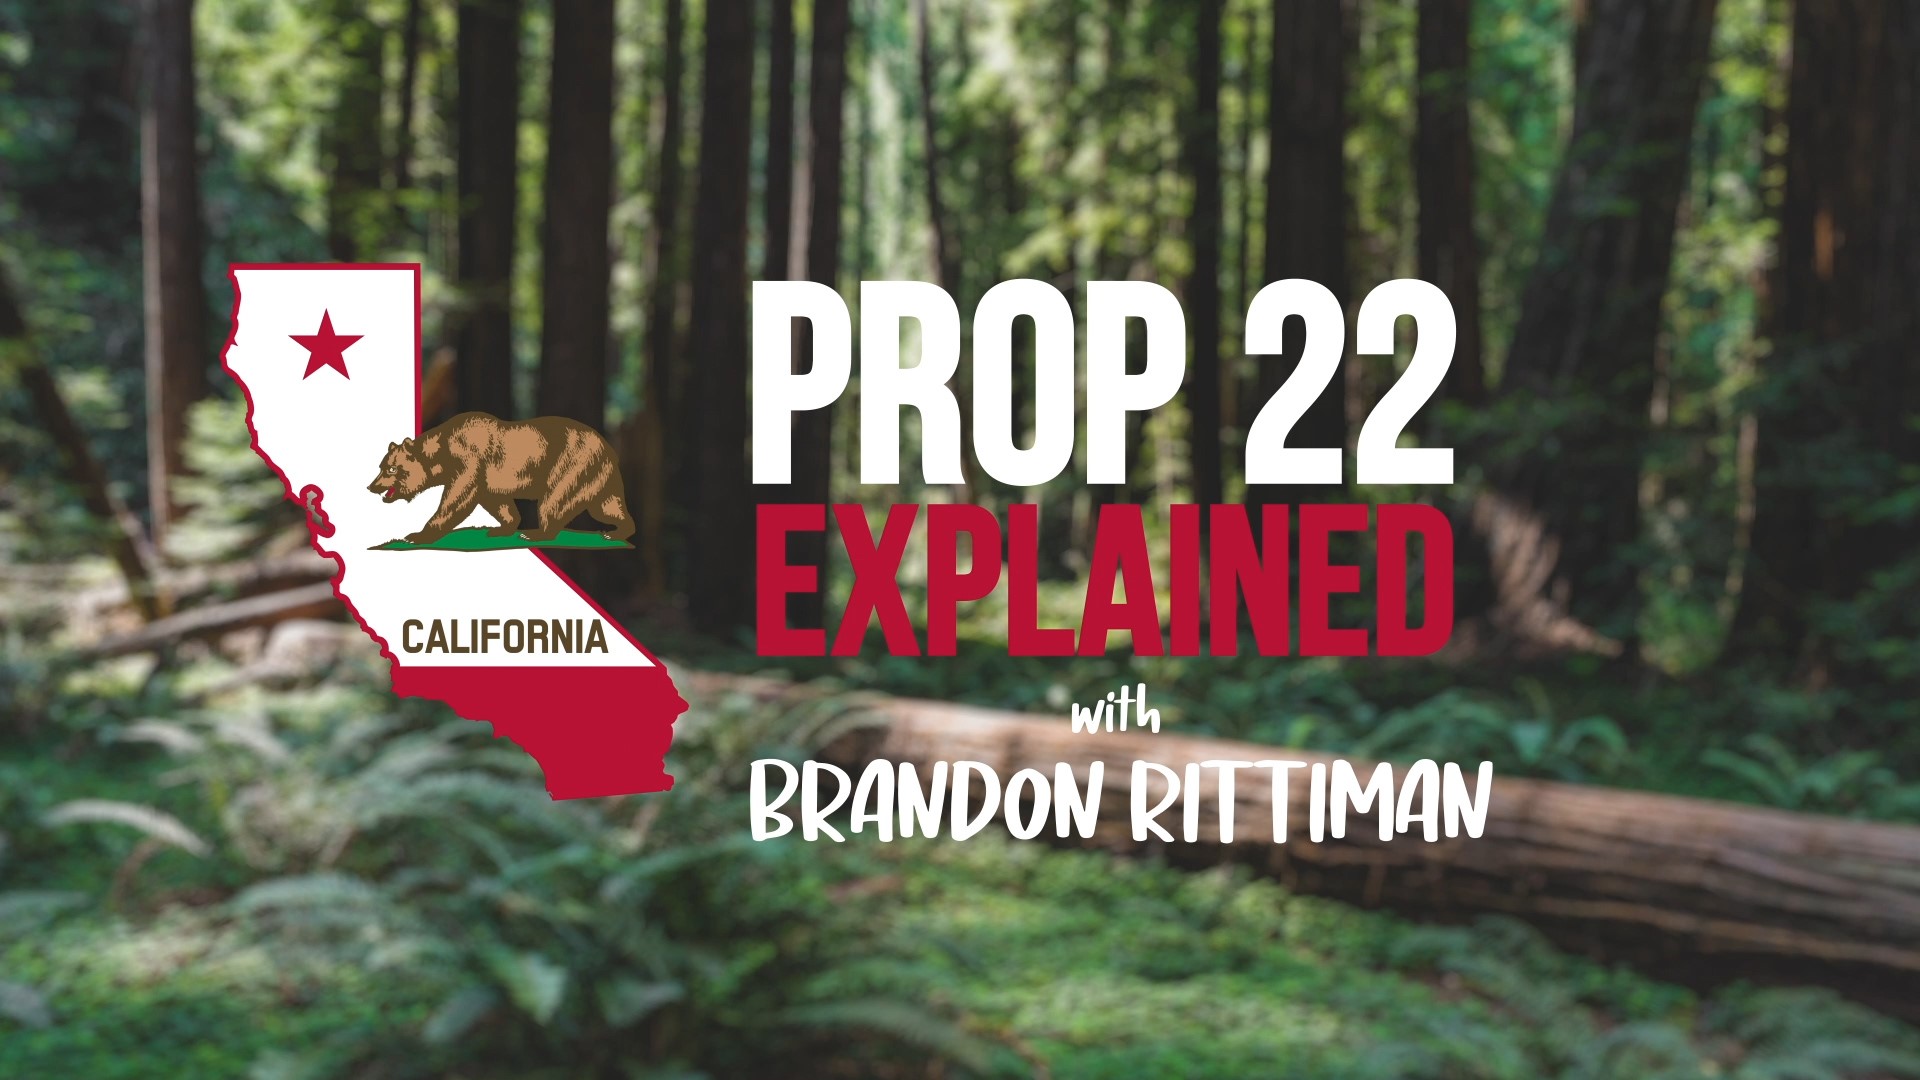 ABC10's Brandon Rittiman takes a closer look at California Proposition 22, App-Based Drivers as Contractors and Labor Policies Initiative.